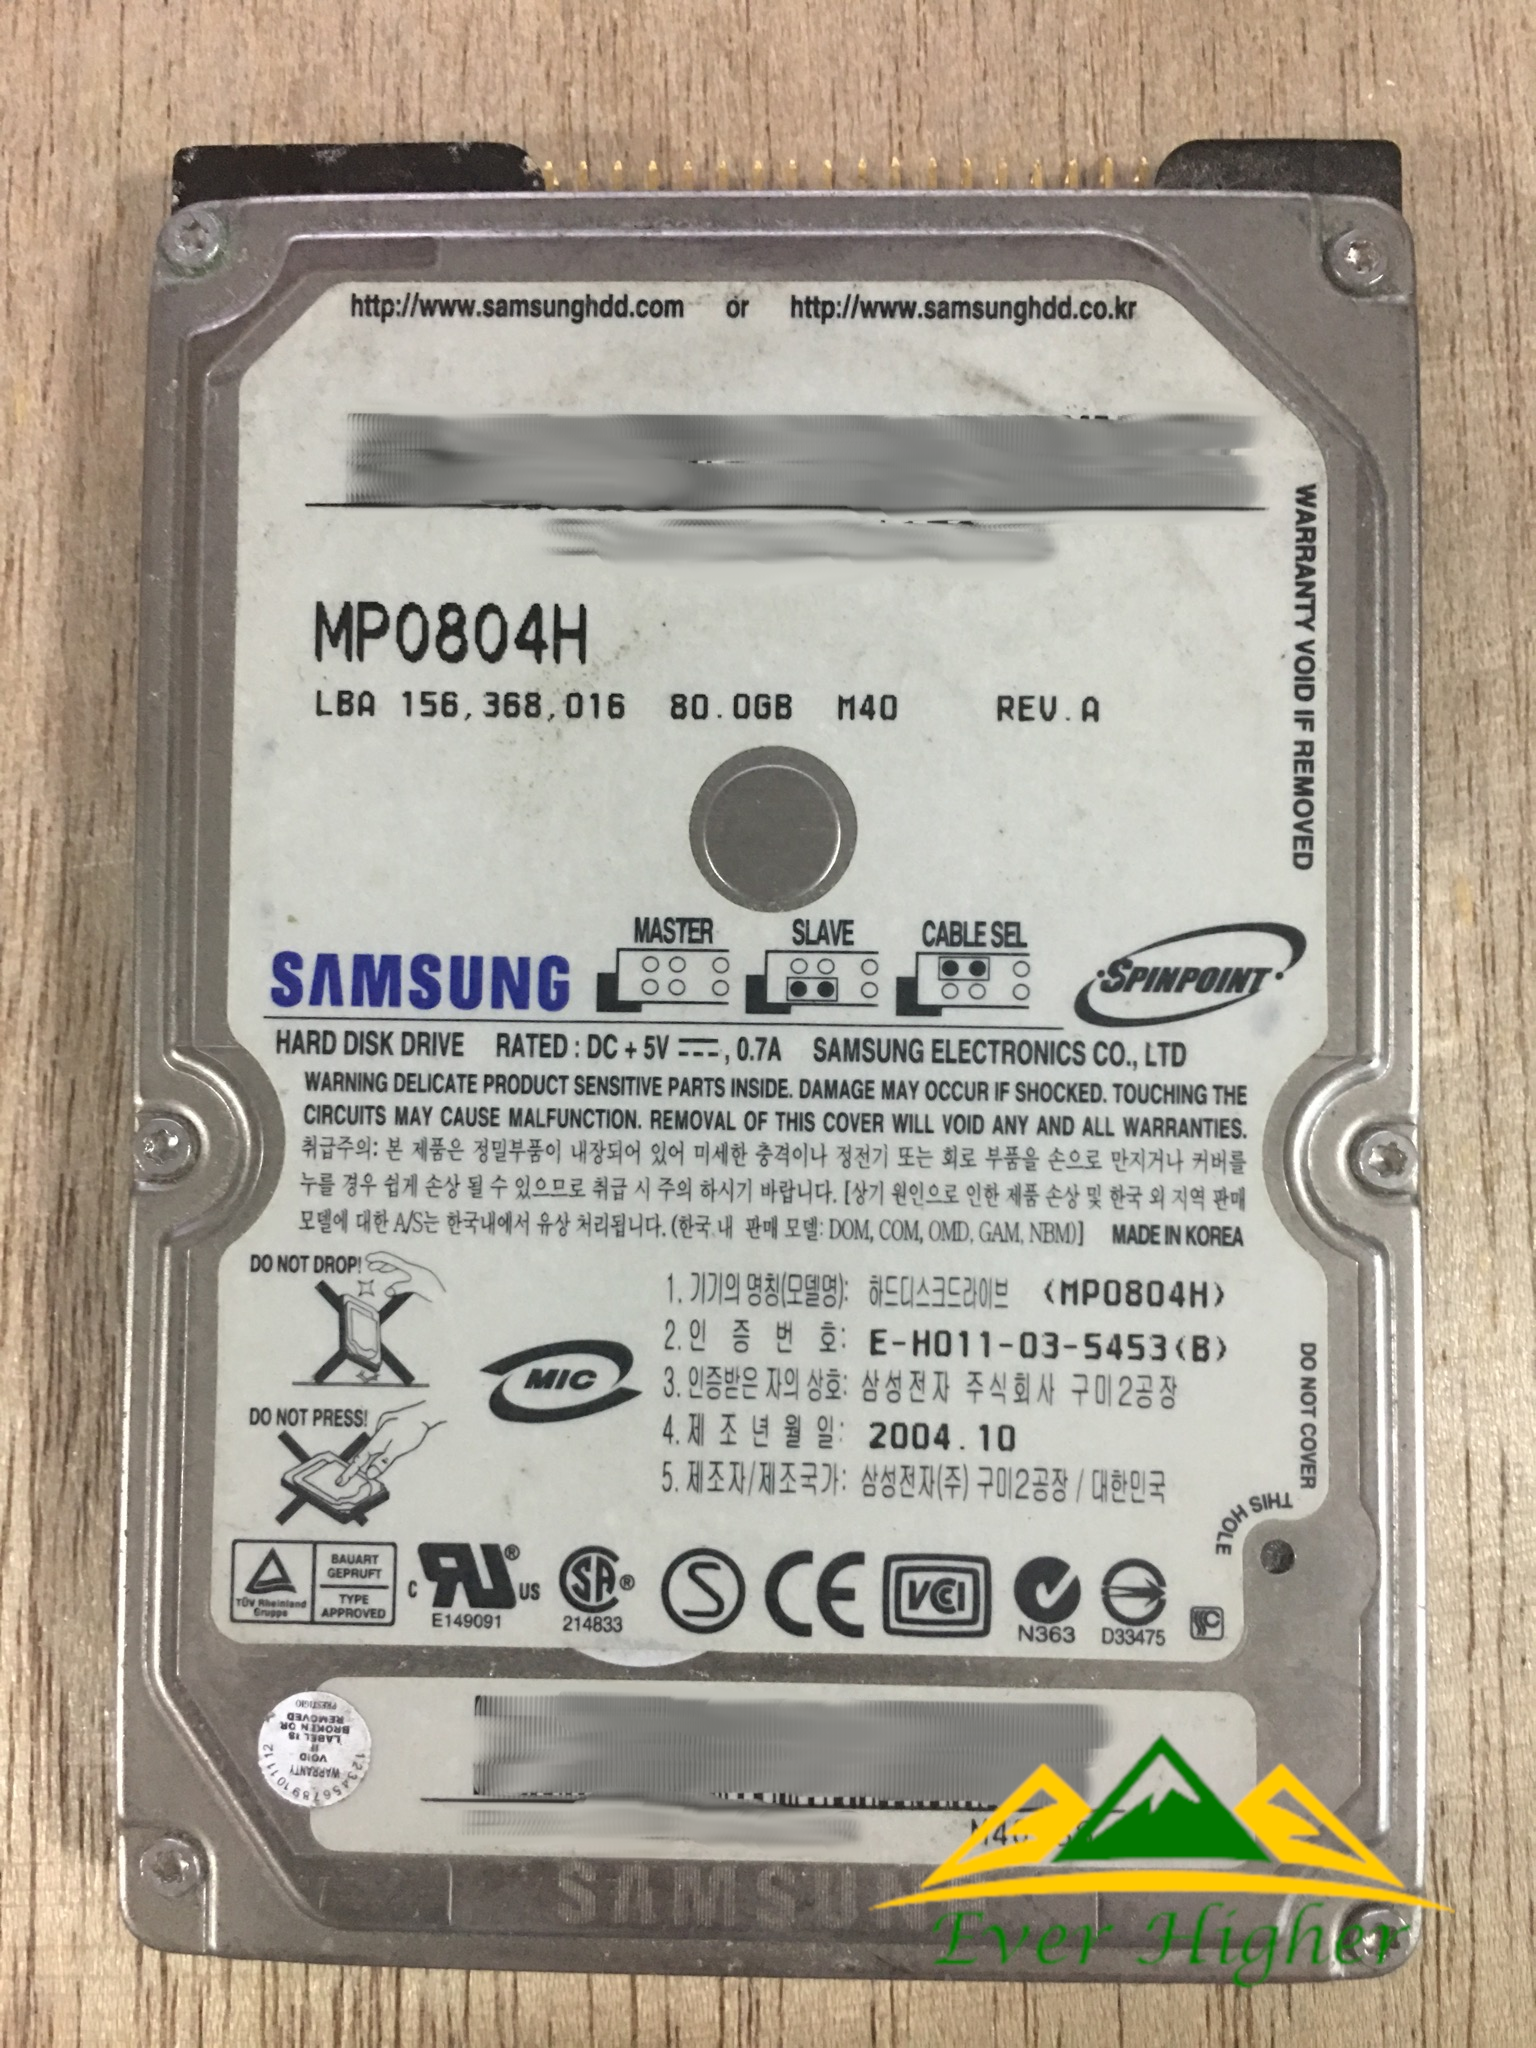 Samsung 2.5 hdd data recovery service in Singapore